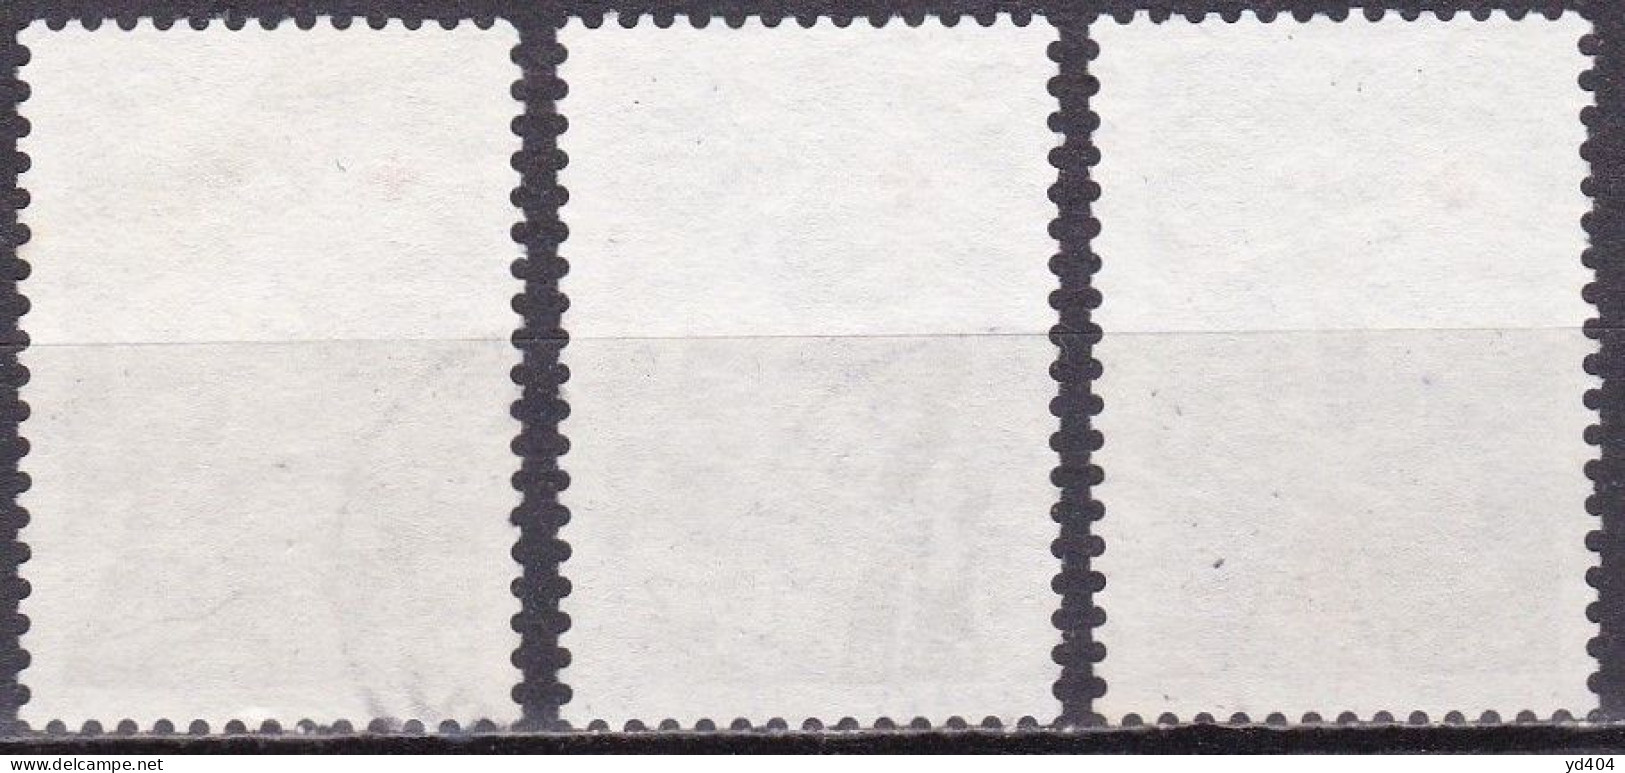 FI089 – FINLANDE – FINLAND – 1954 – RED CROSS FUND – SG 523/4 USED 8 € - Used Stamps